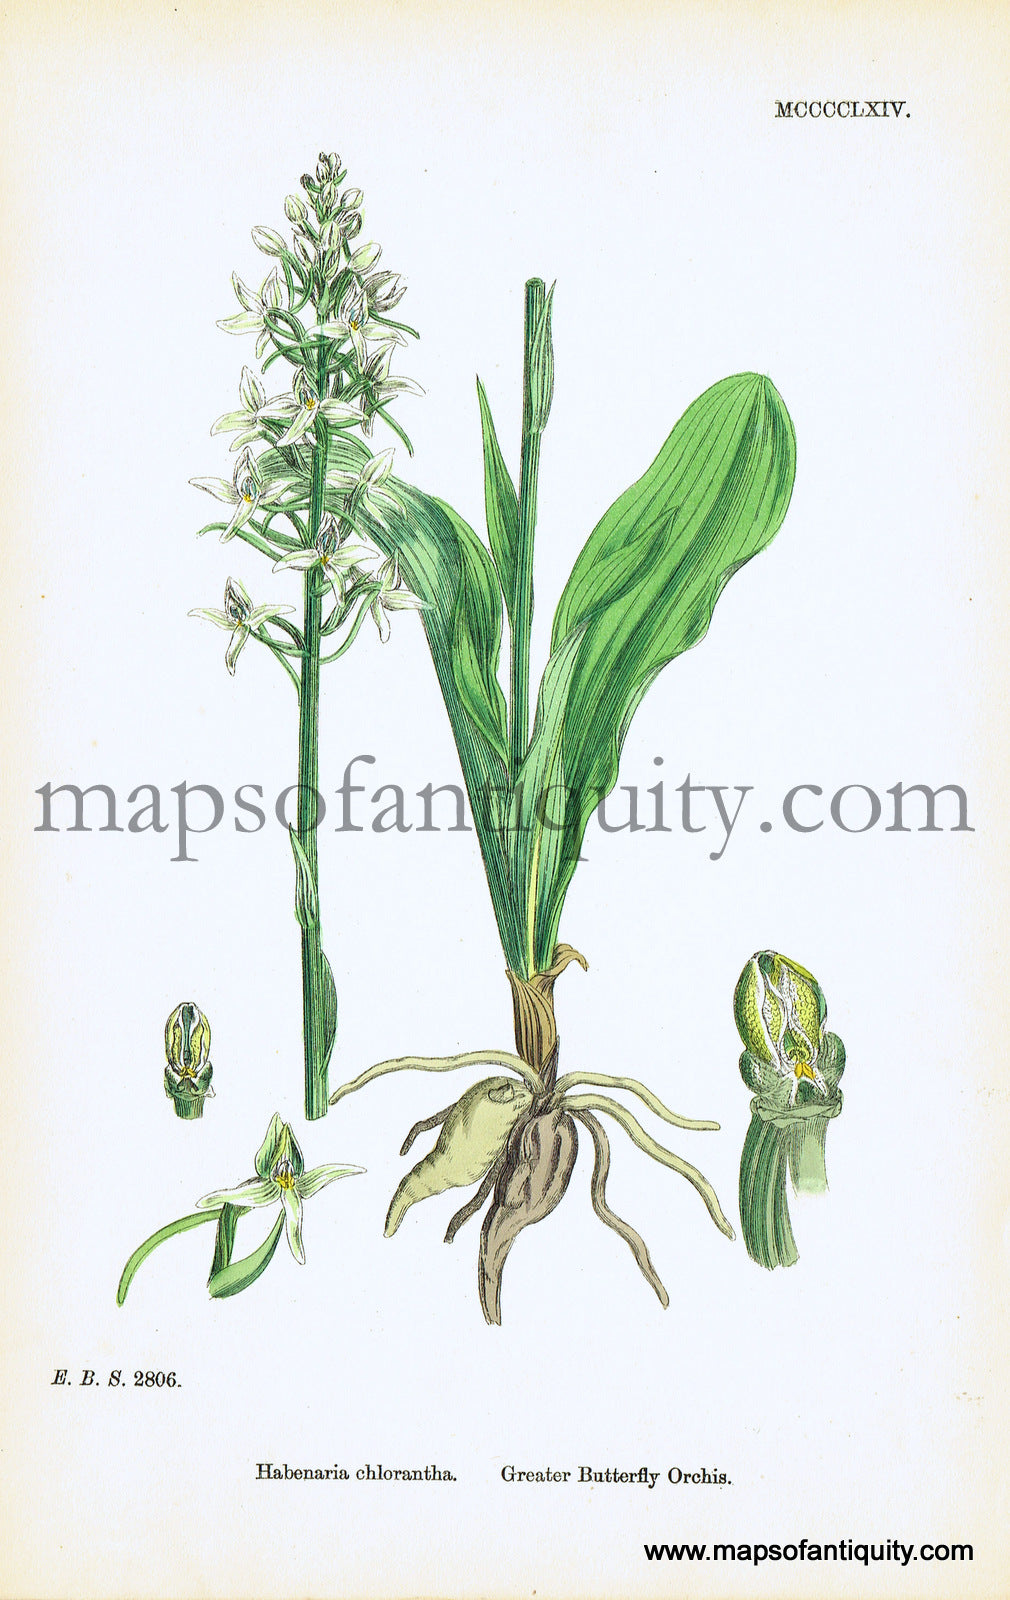 Antique-Hand-Colored-Print-Habenaria-chlorantha-Antique-Prints-Natural-History-Botanical-c.-1860-Sowerby-Maps-Of-Antiquity